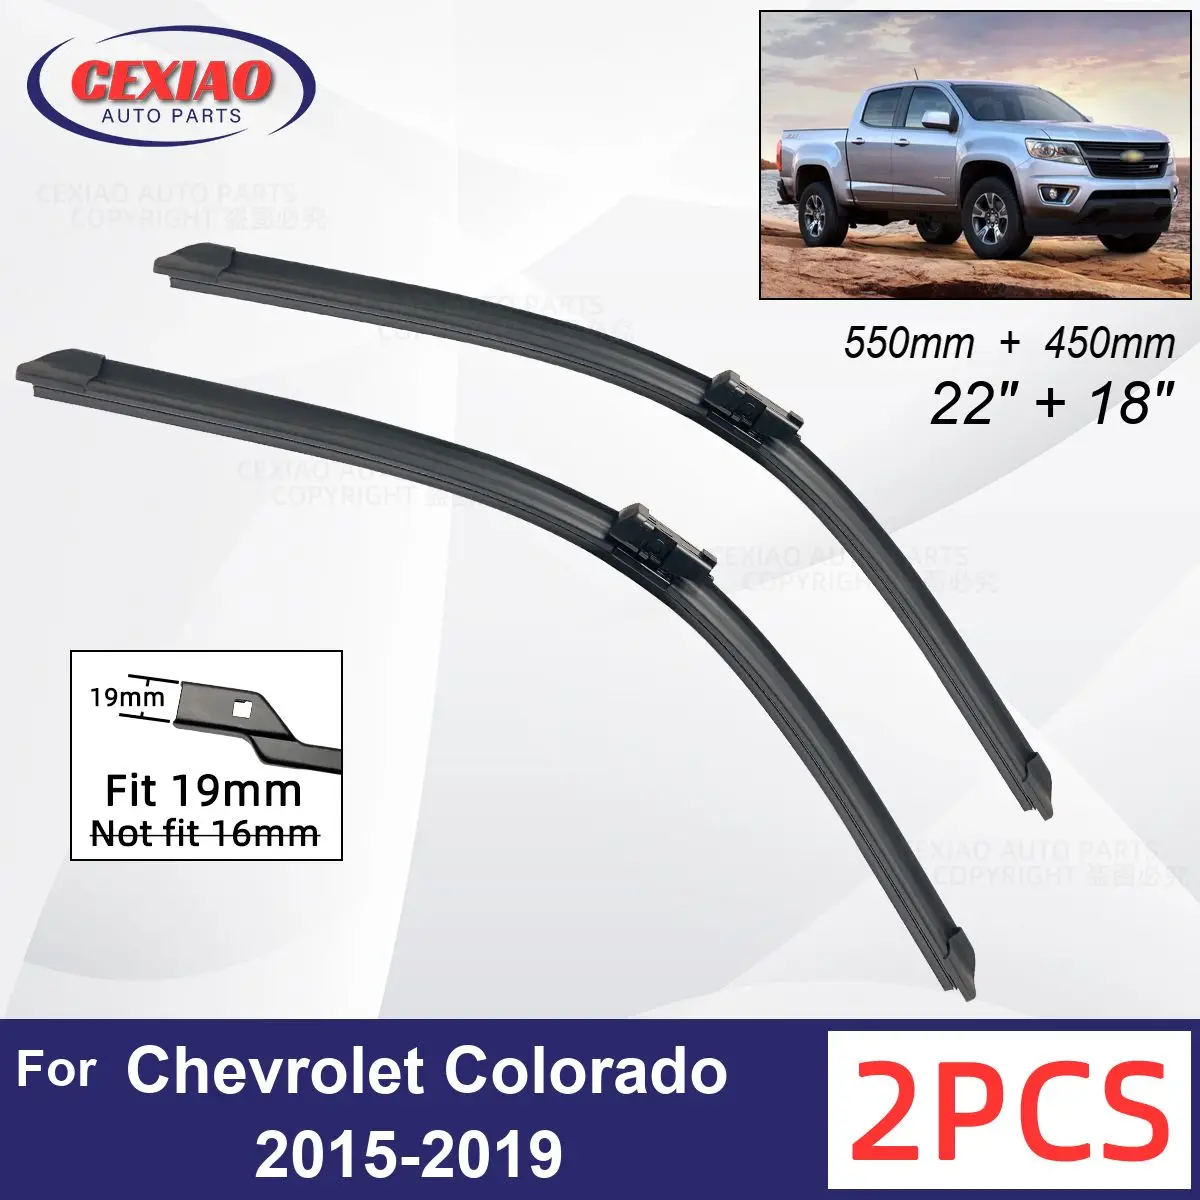 

Car Wiper For Chevrolet Colorado 2015-2019 Front Wiper Blades Soft Rubber Windscreen Wipers Auto Windshield 22" 18" 550mm 450mm